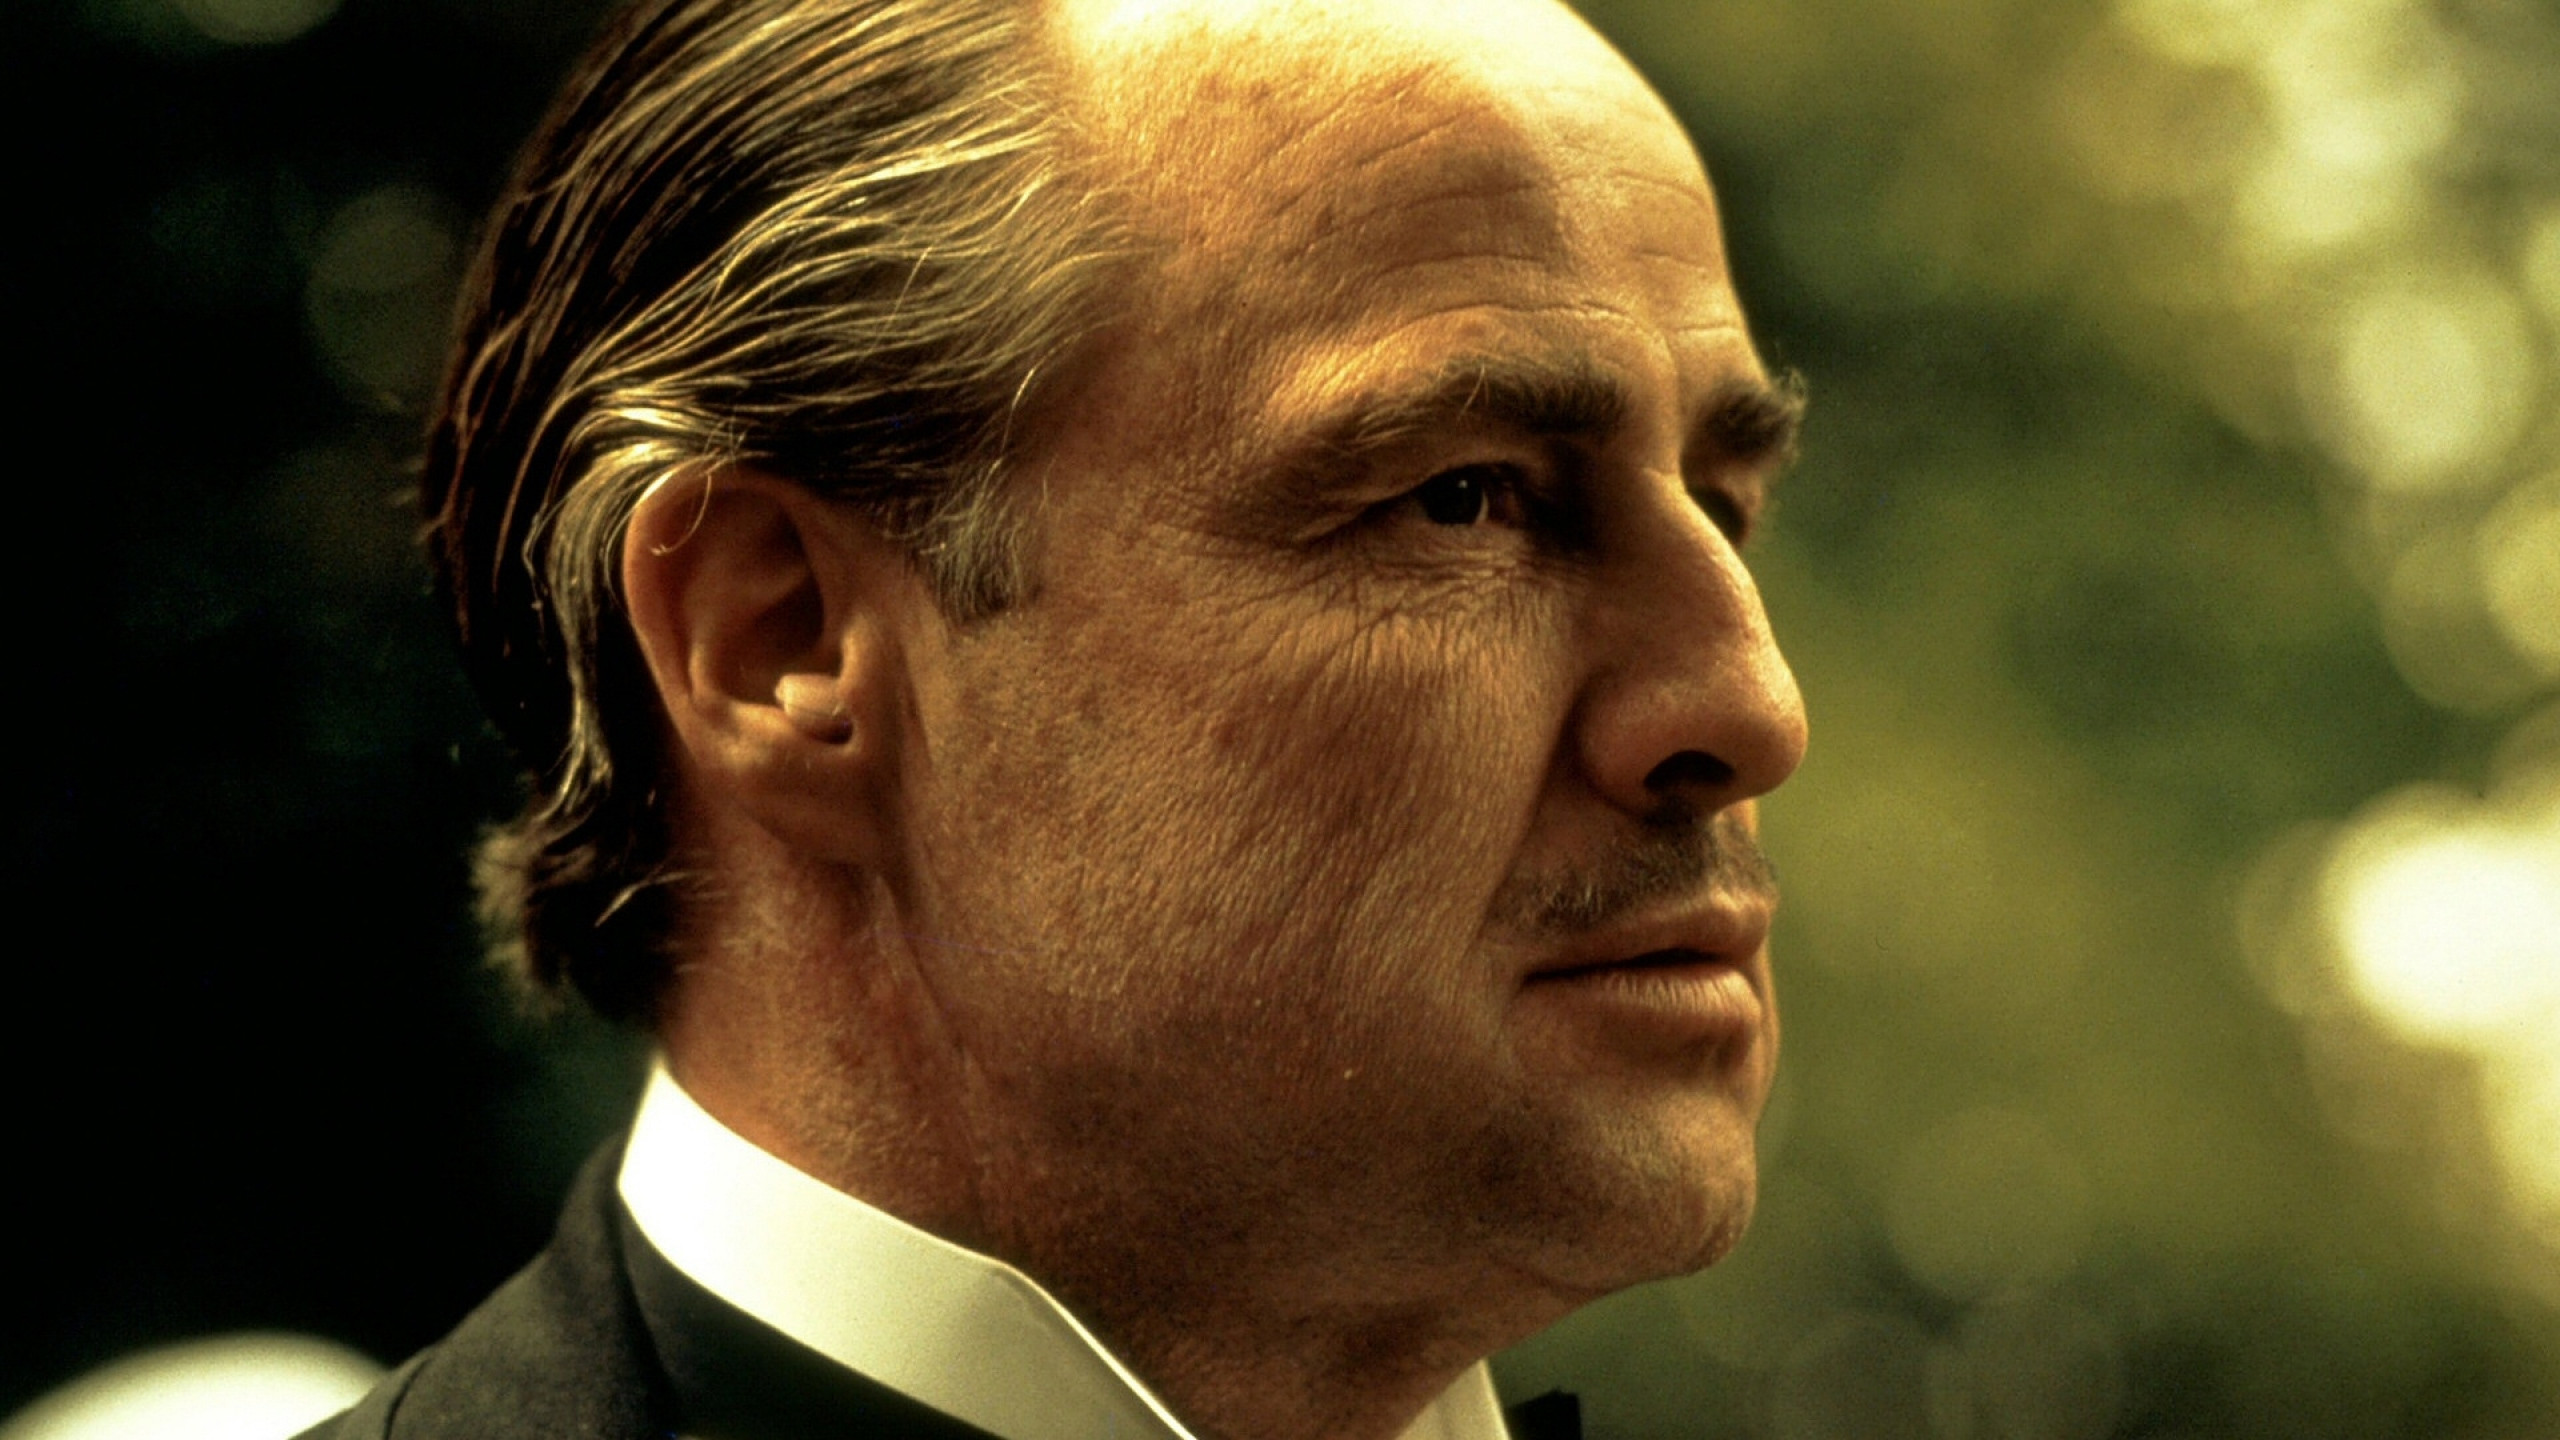 The GodFather Film Wallpaper for iPhone 12 Pro